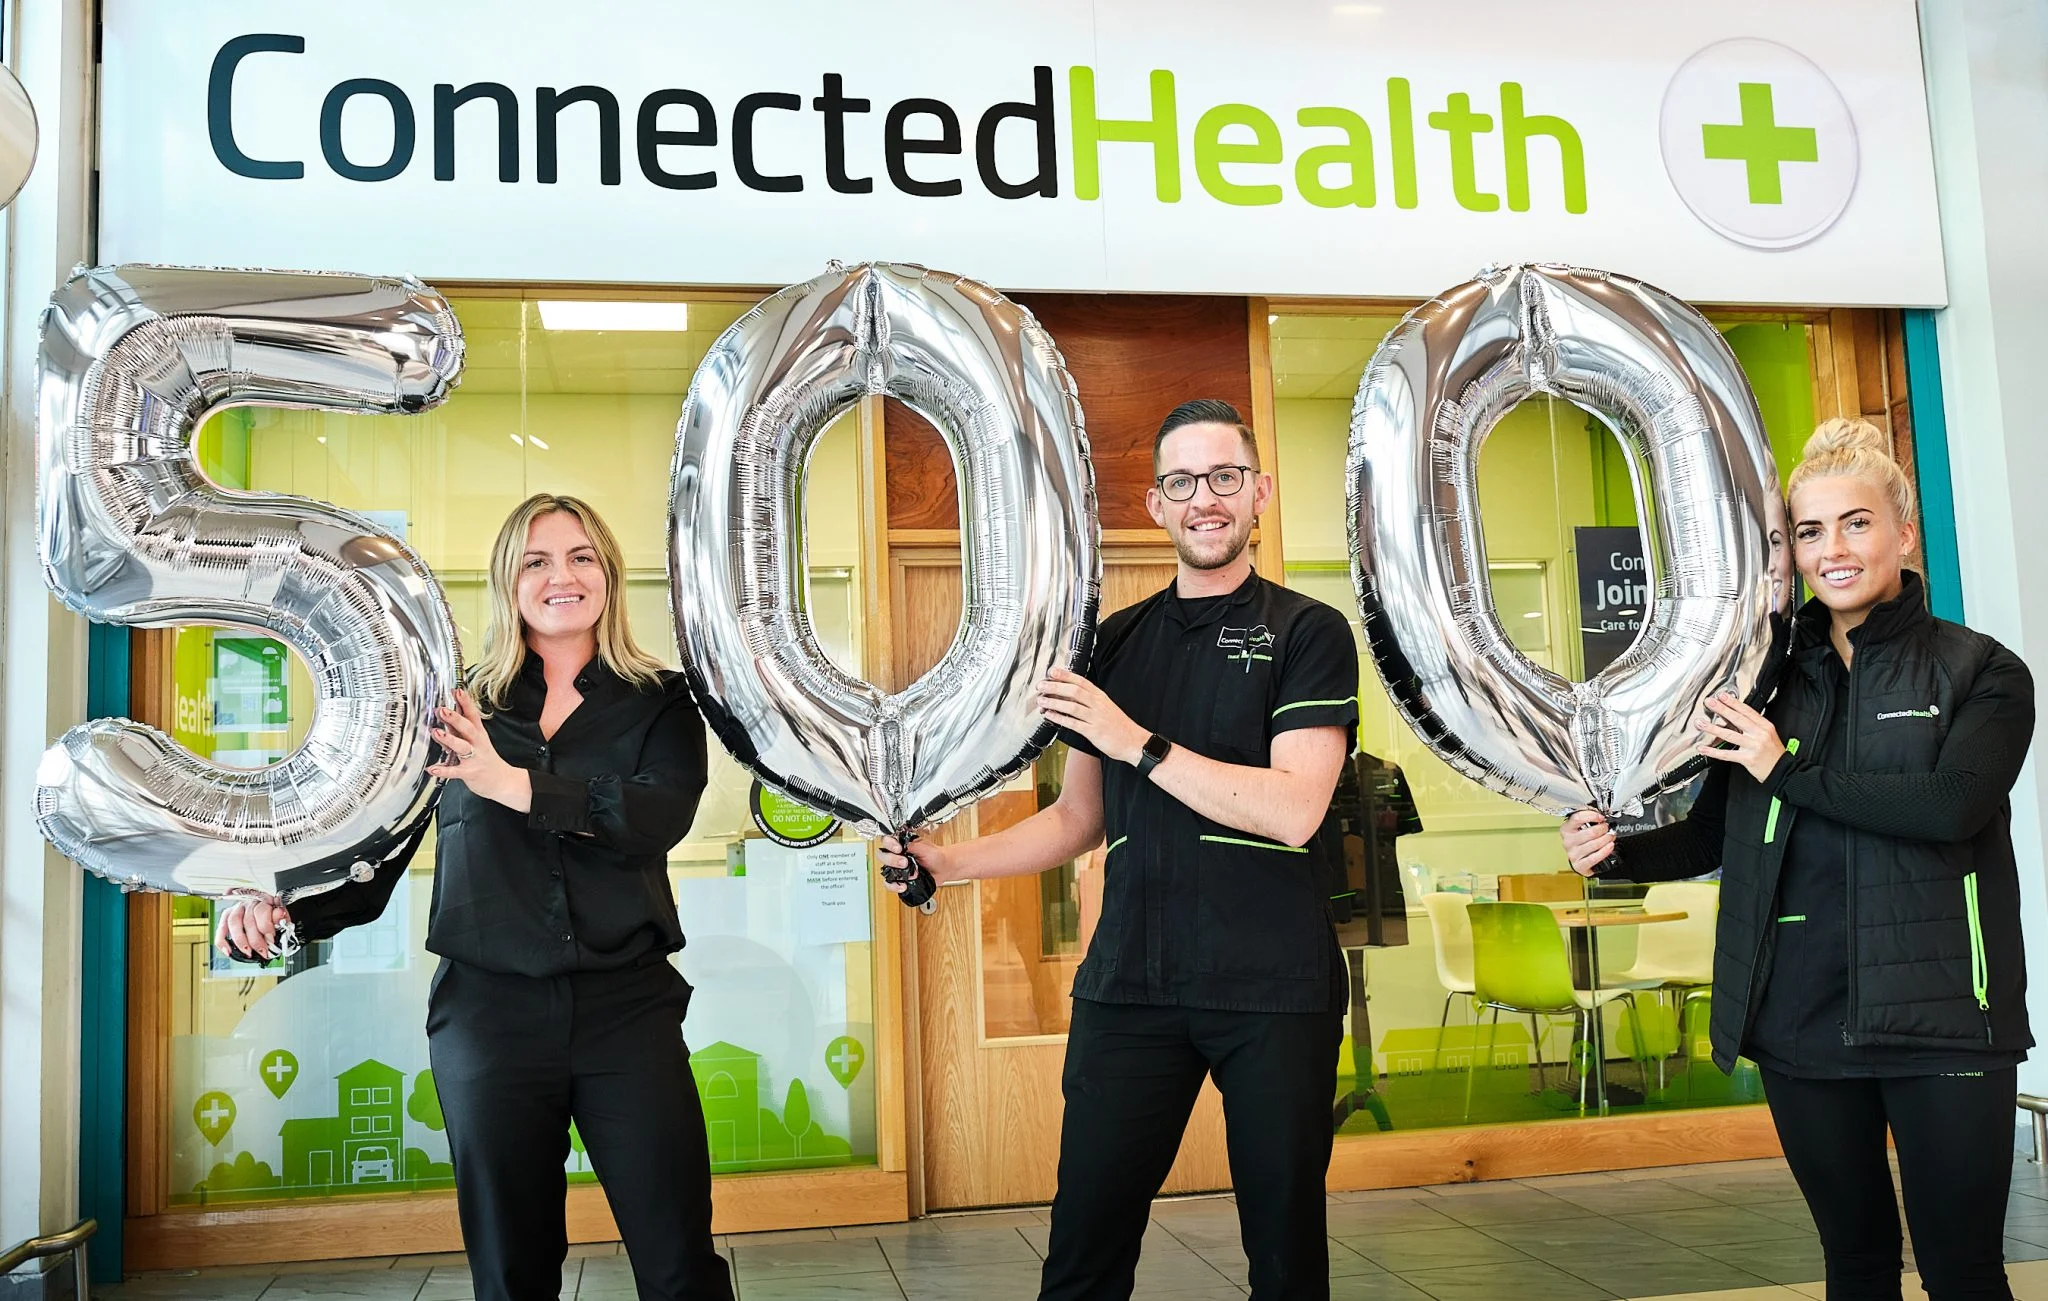 Connected Health creates 500 new NI jobs and adopts London Living Wage